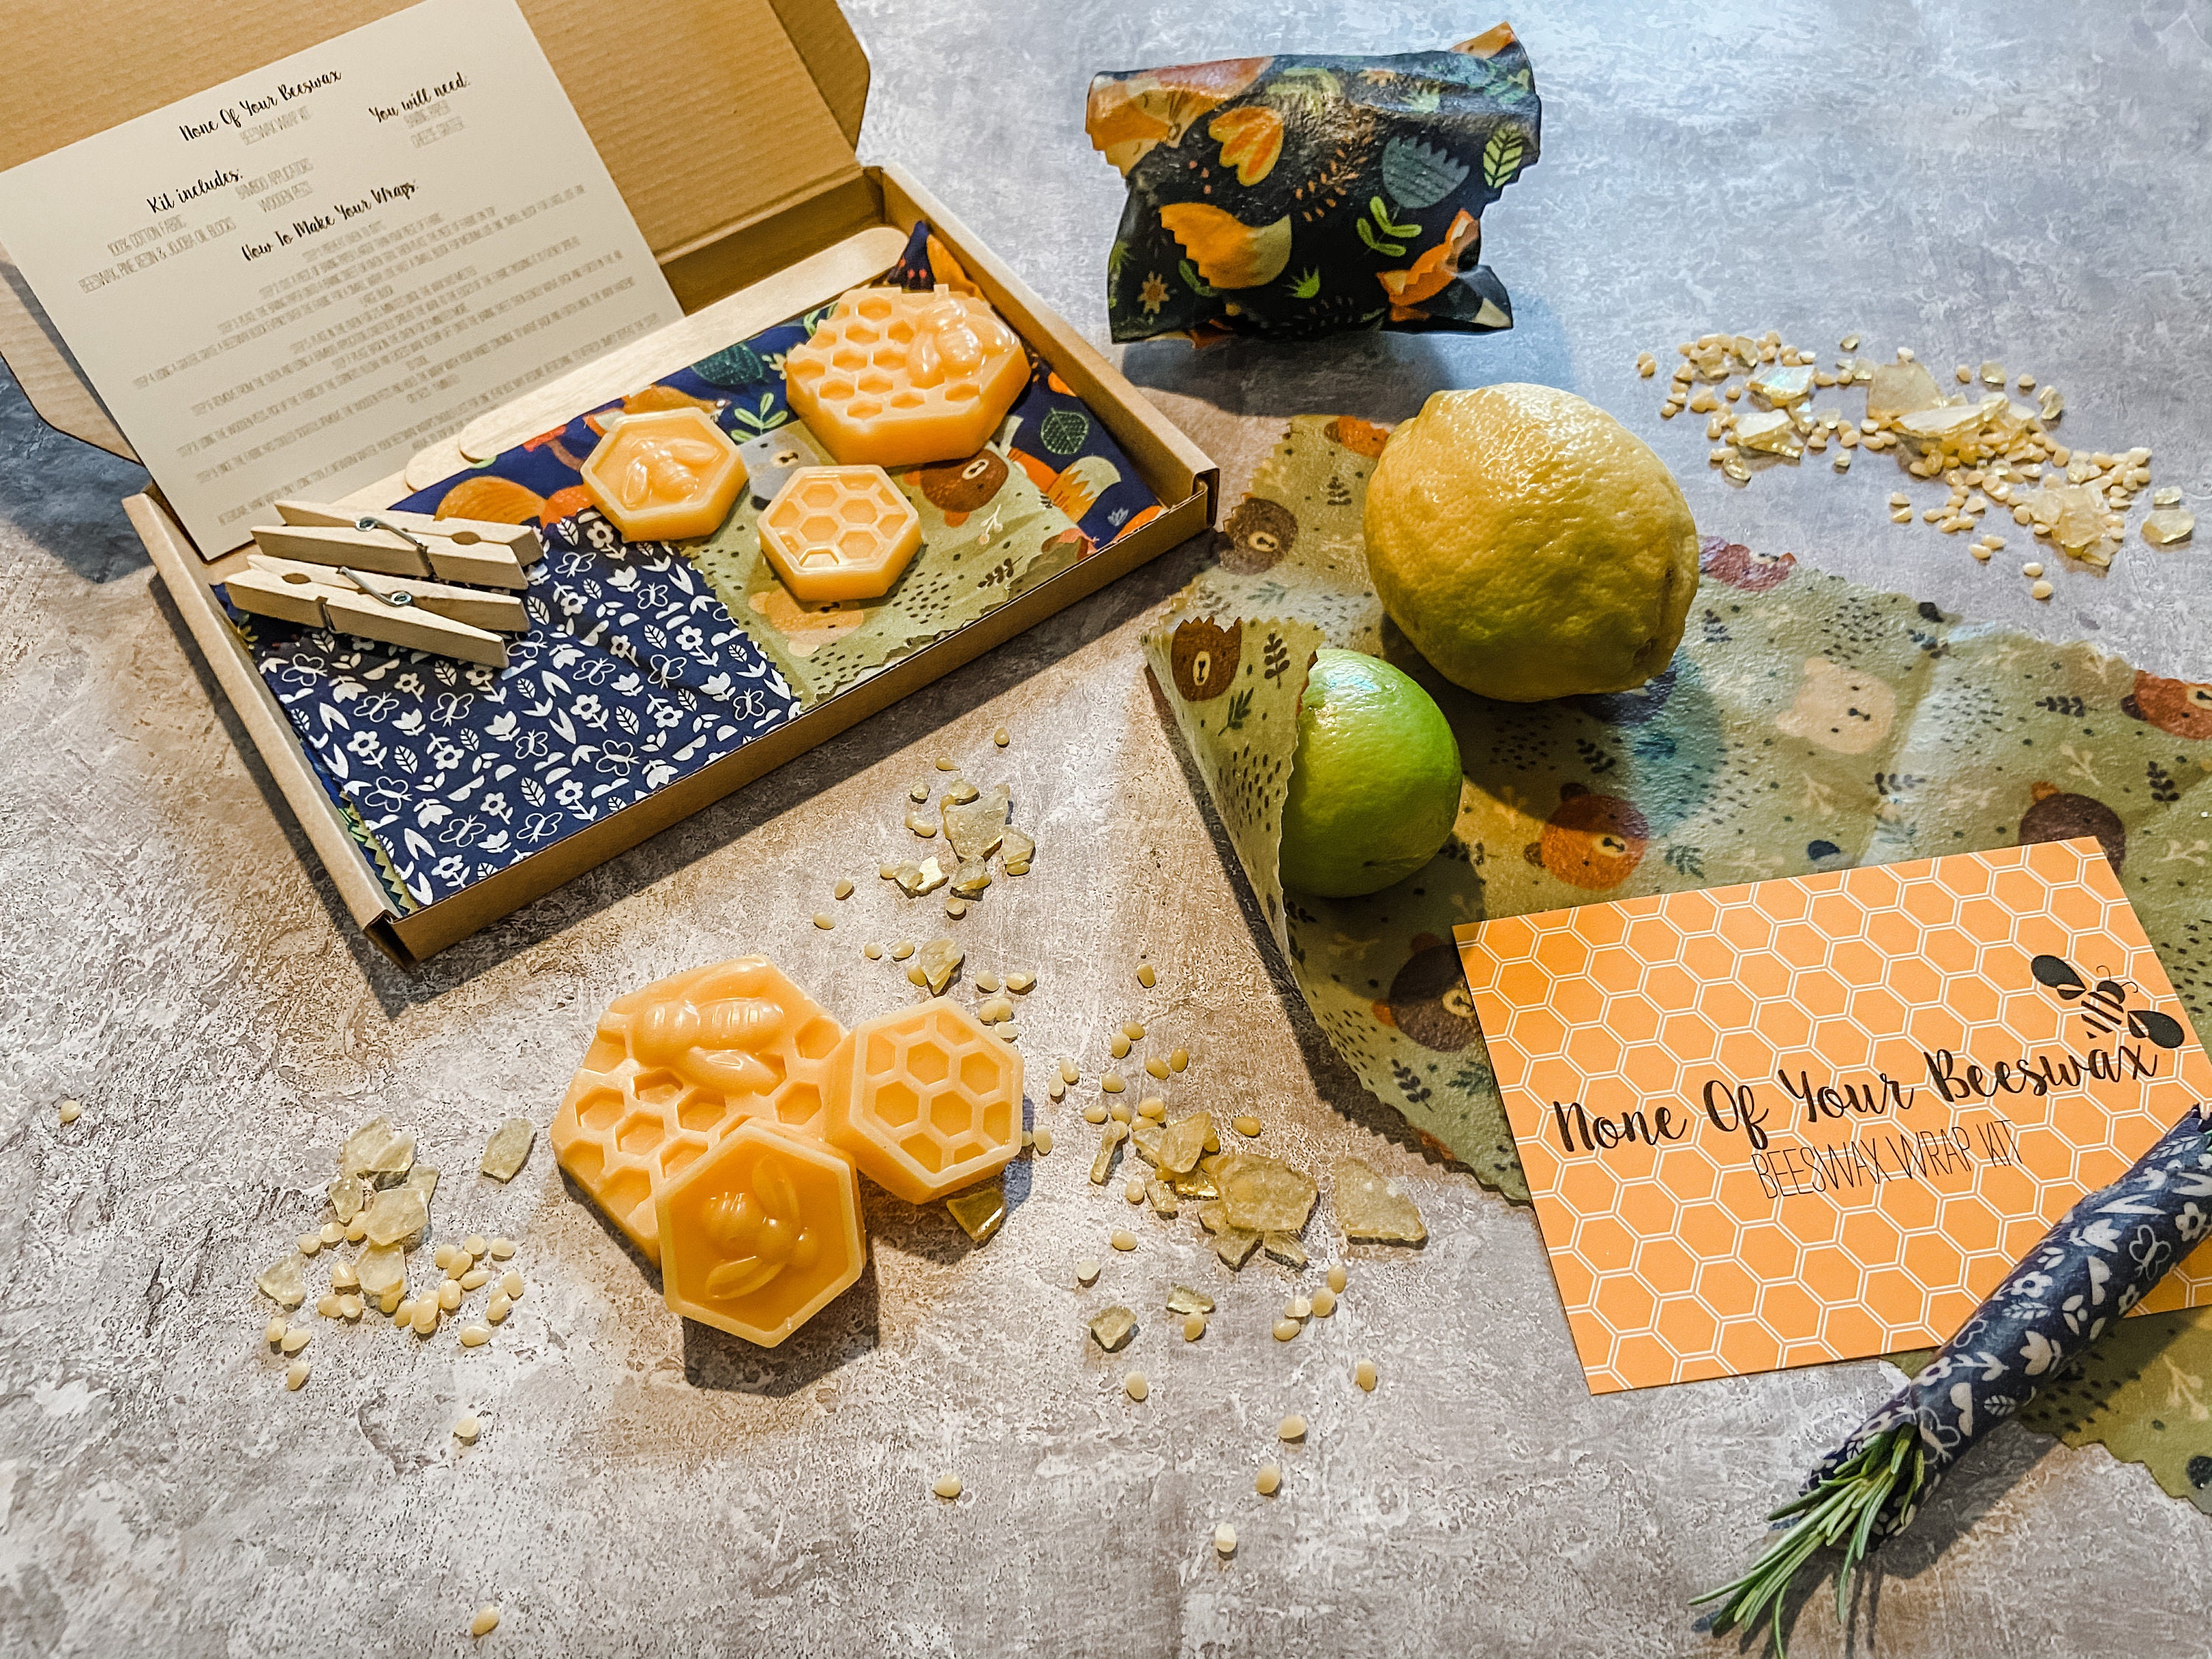 DIY Beeswax Wrap Kit Make Your Own Set of 3 or 4 Reusable Beeswax Wraps  bees, Flowers, Cats and More Designs -  Sweden